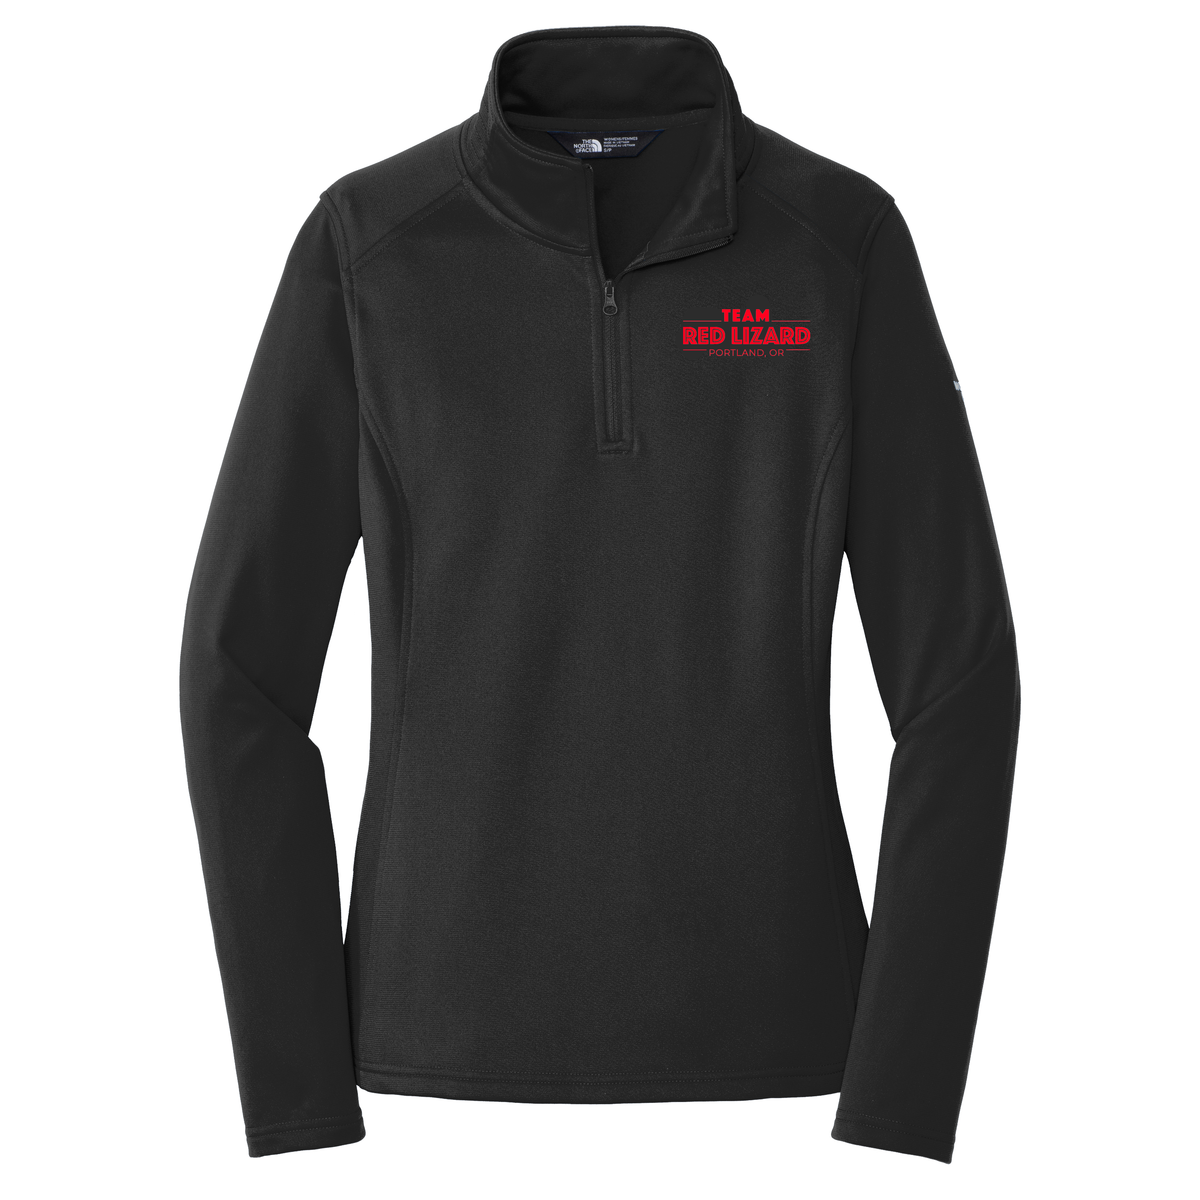 Team Red Lizard The North Face Ladies Tech 1/4 Zip